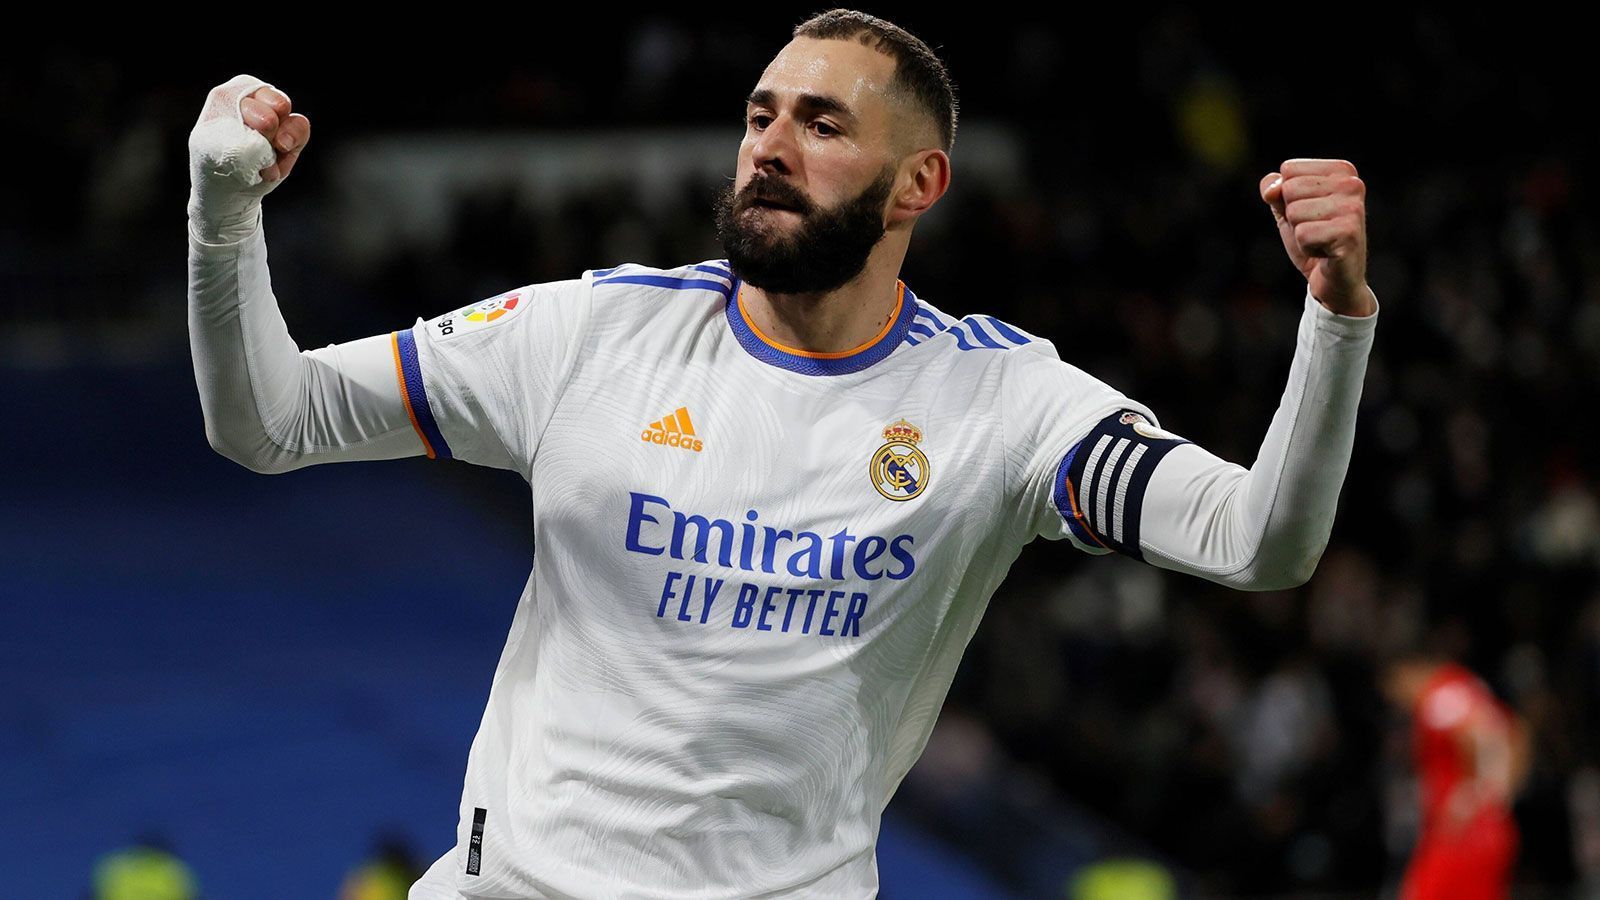 
                <strong>Platz 4: Karim Benzema</strong><br>
                33 Jahre | Angriff | Real Madrid
              